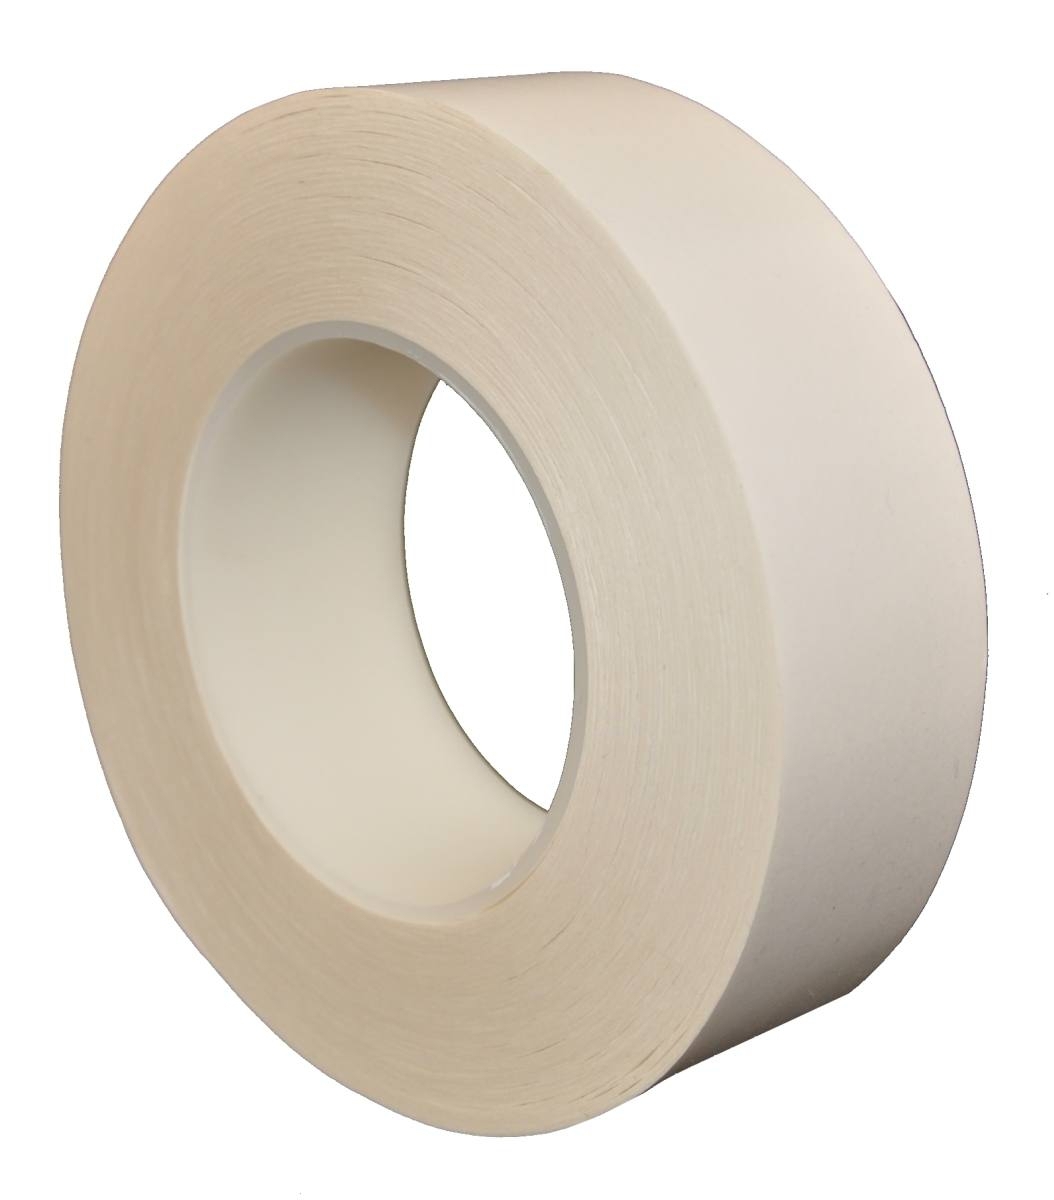 SKS silicone paper release liner, 400mmx150m, coated on both sides with glassine, white